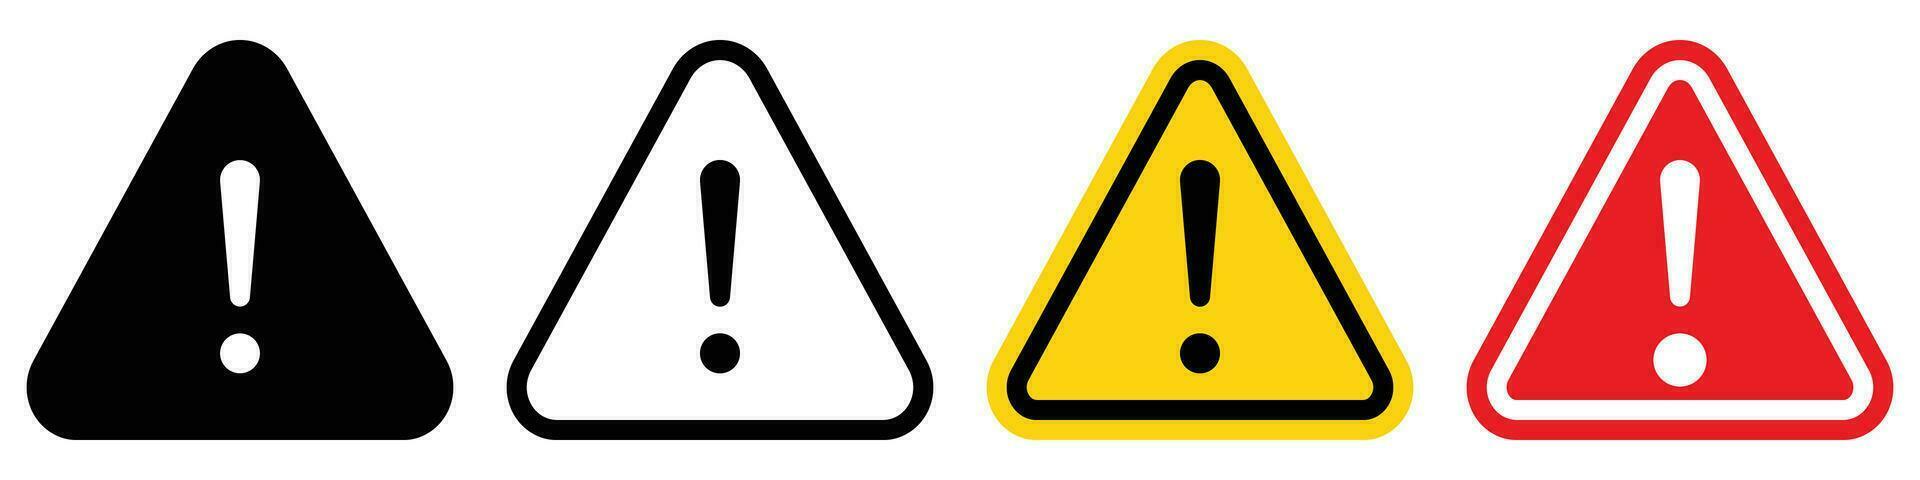 Warning Icons Set - Triangle Exclamation Mark Symbols, Caution Vector Graphics